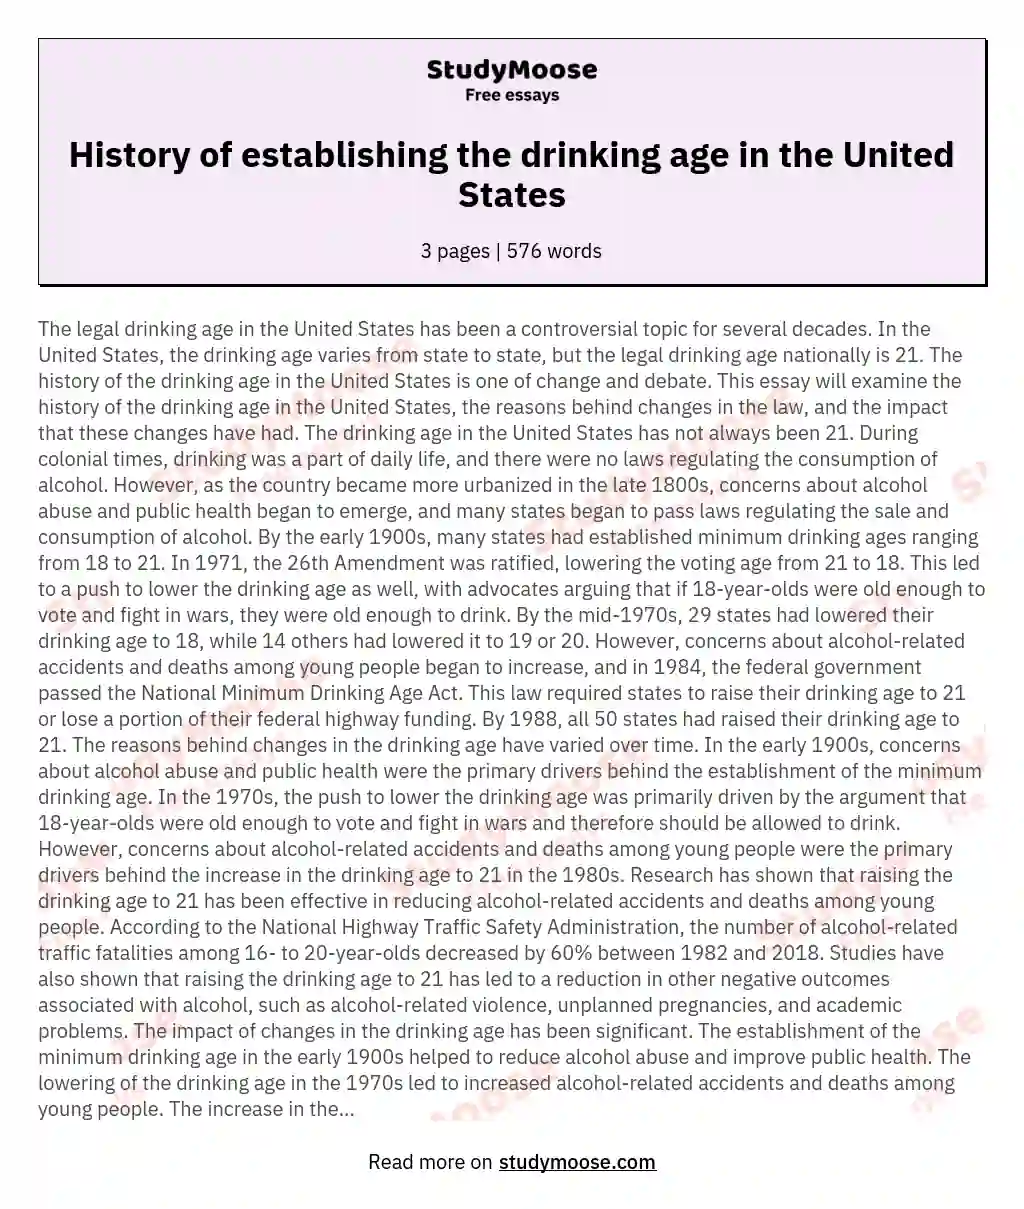 History of establishing the drinking age in the United States essay